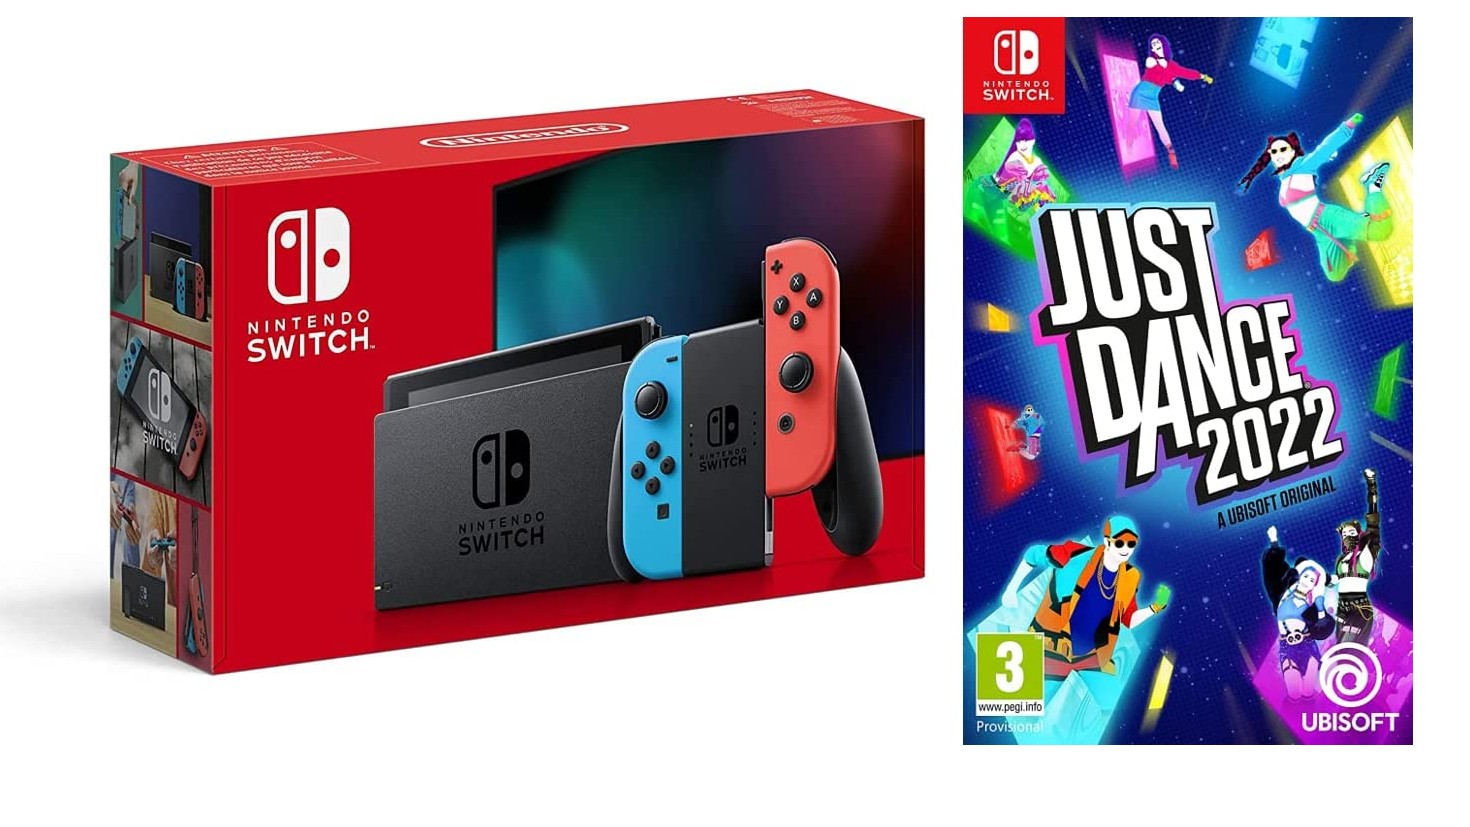 Nintendo Switch packaging and Just Dance packaging